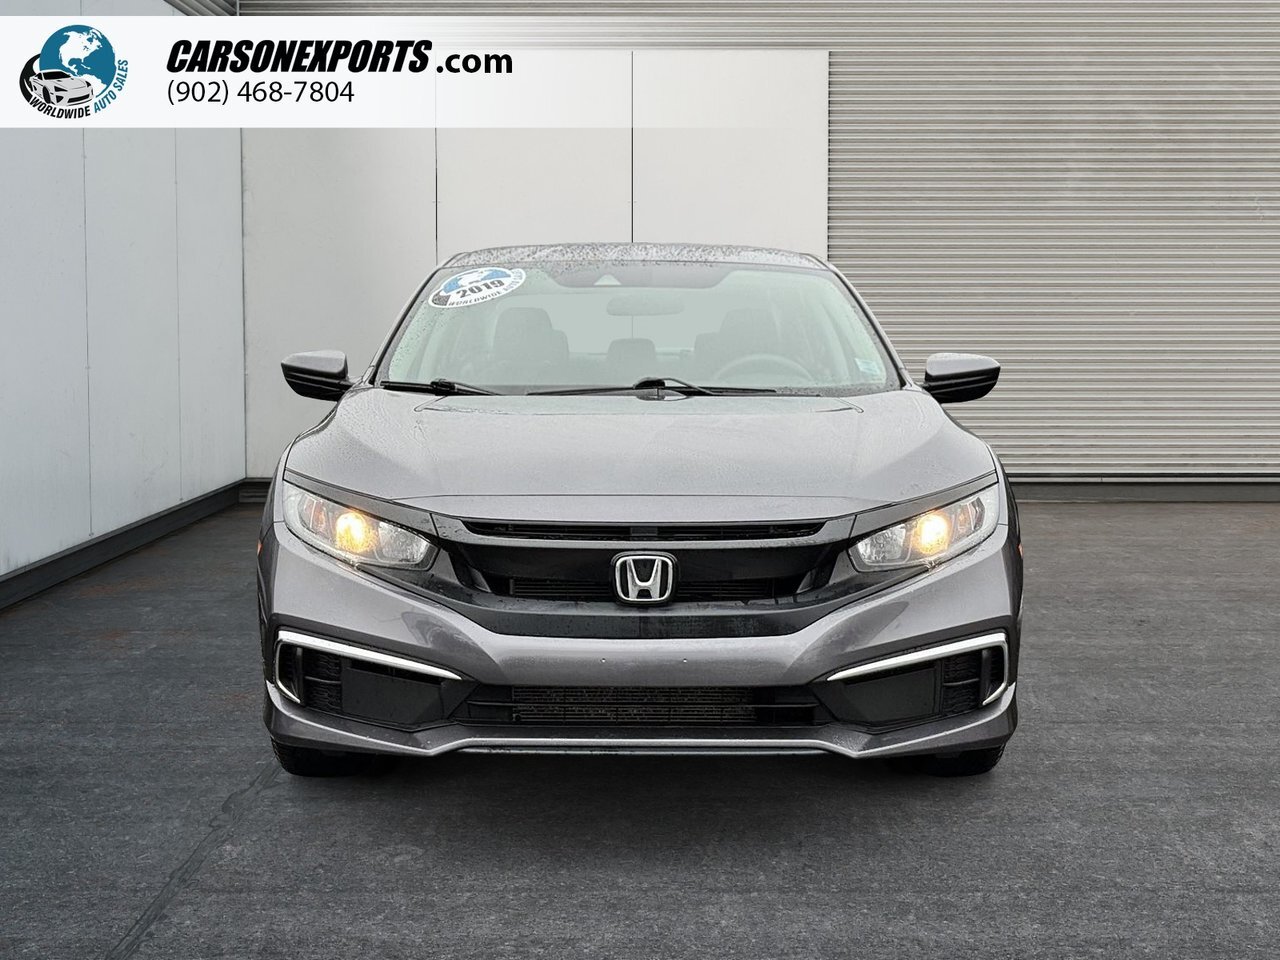 2019 Honda Civic LX The best place to buy a used car. Period.